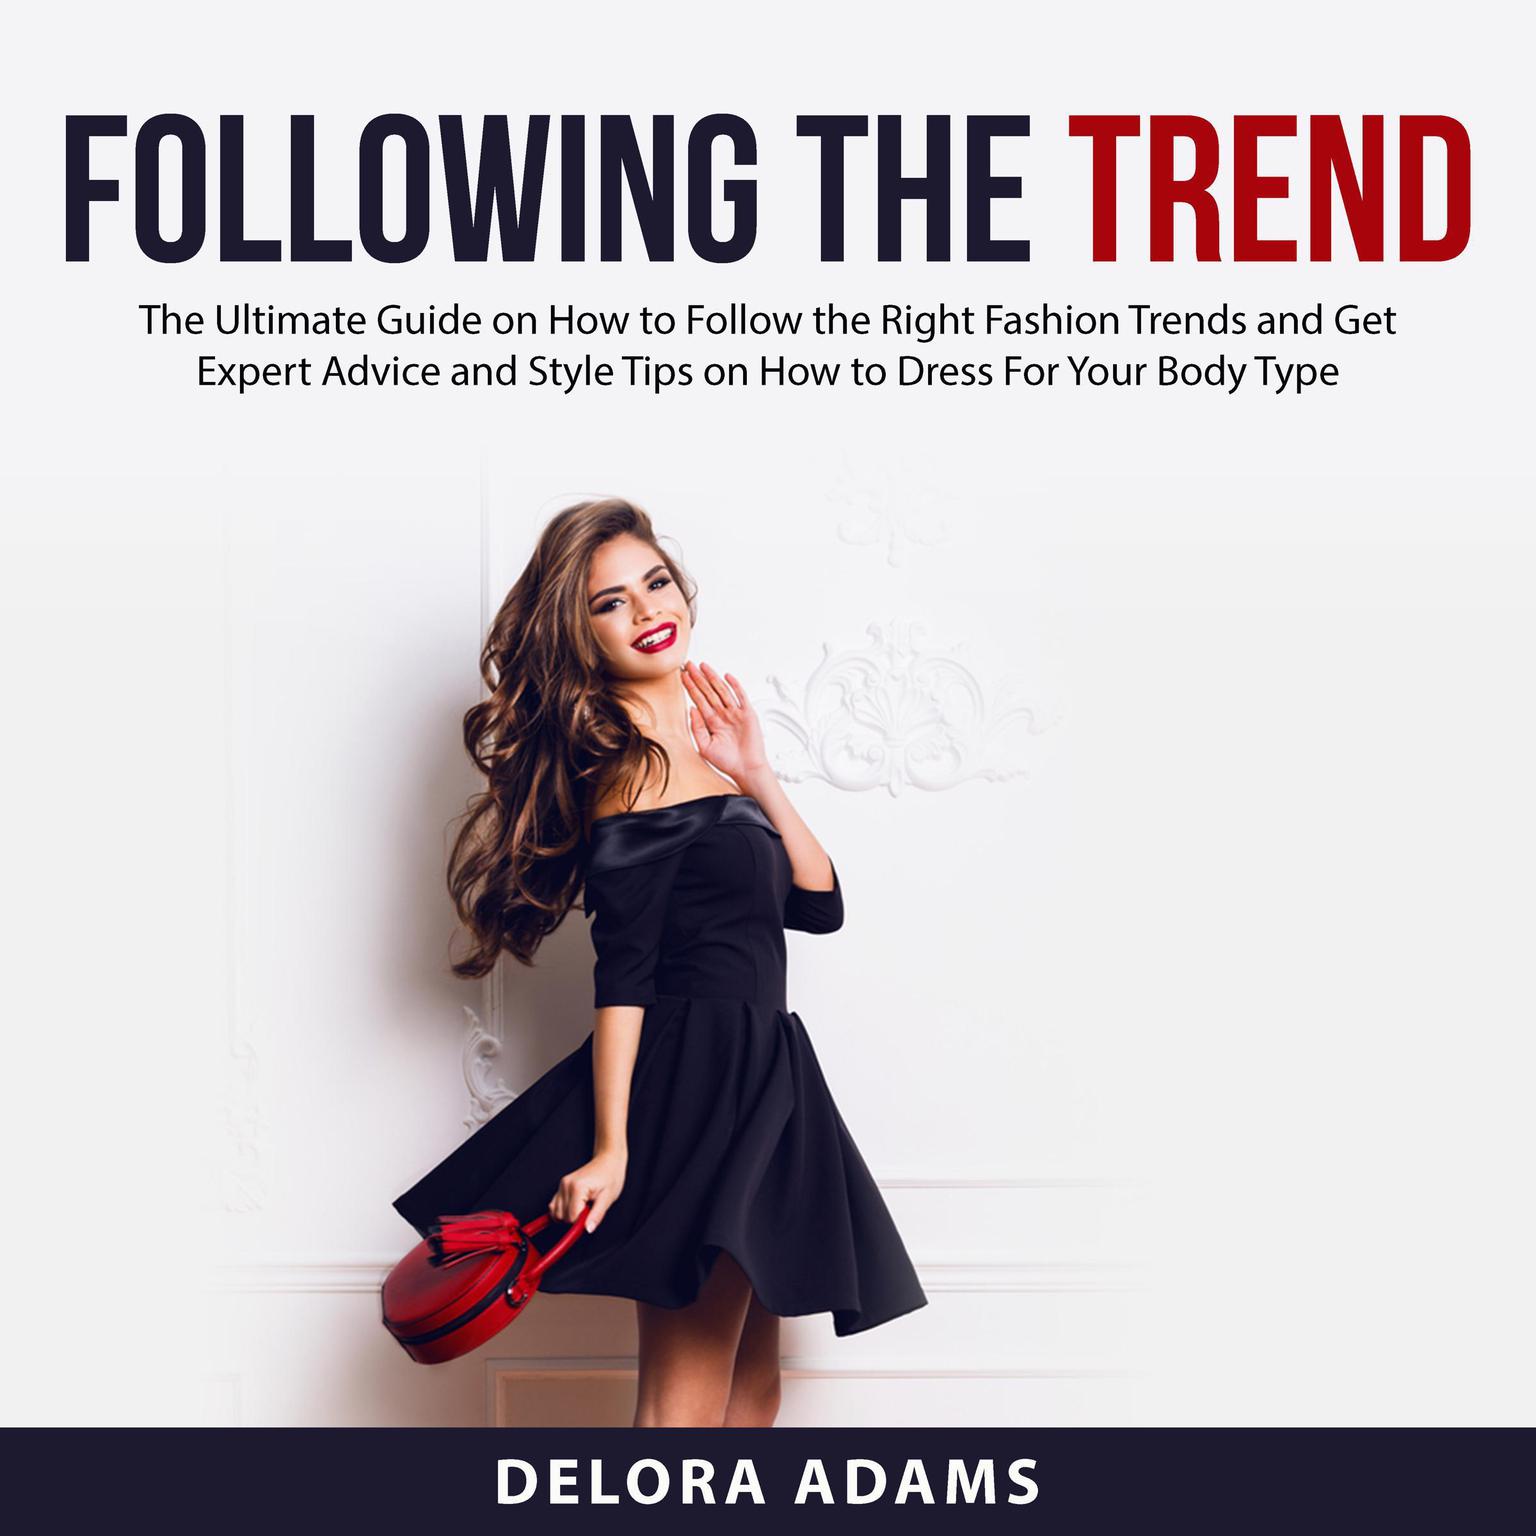 Following the Trend: The Ultimate Guide on How to Follow the Right Fashion Trends and Get Expert Advice and Style Tips on How to Dress For Your Body Type Audiobook, by Delora Adams